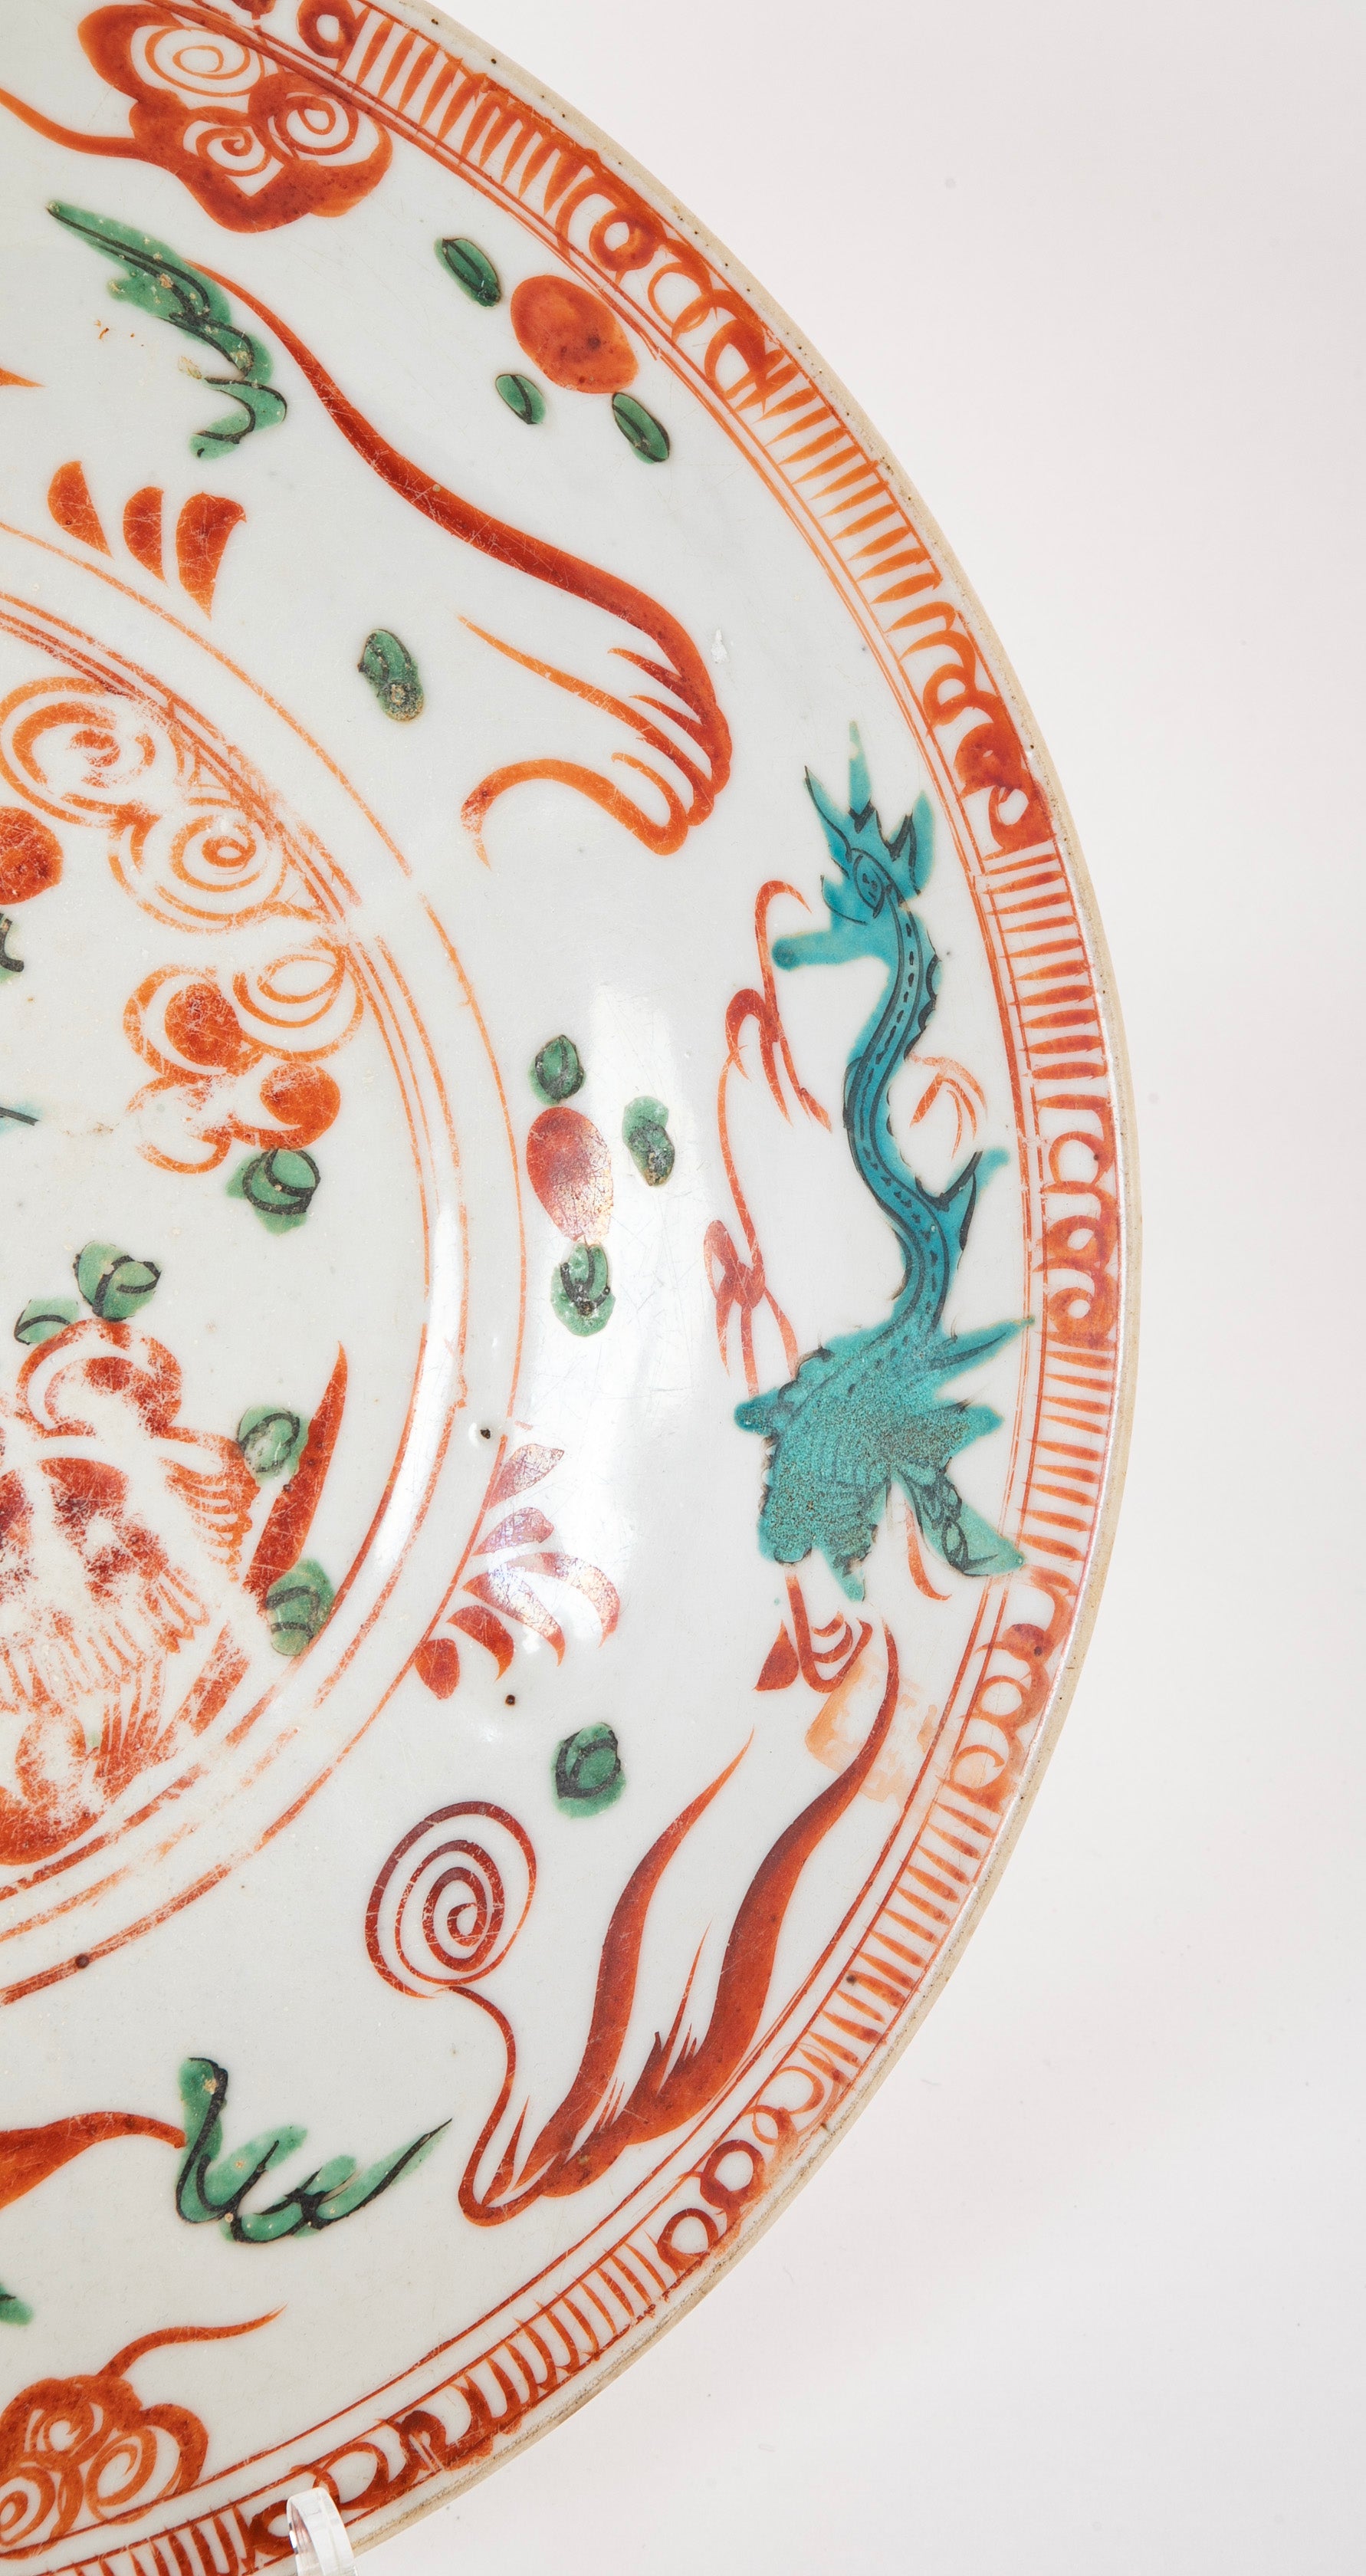 Chinese 17th Century Swatow Enameled Porcelain Charger